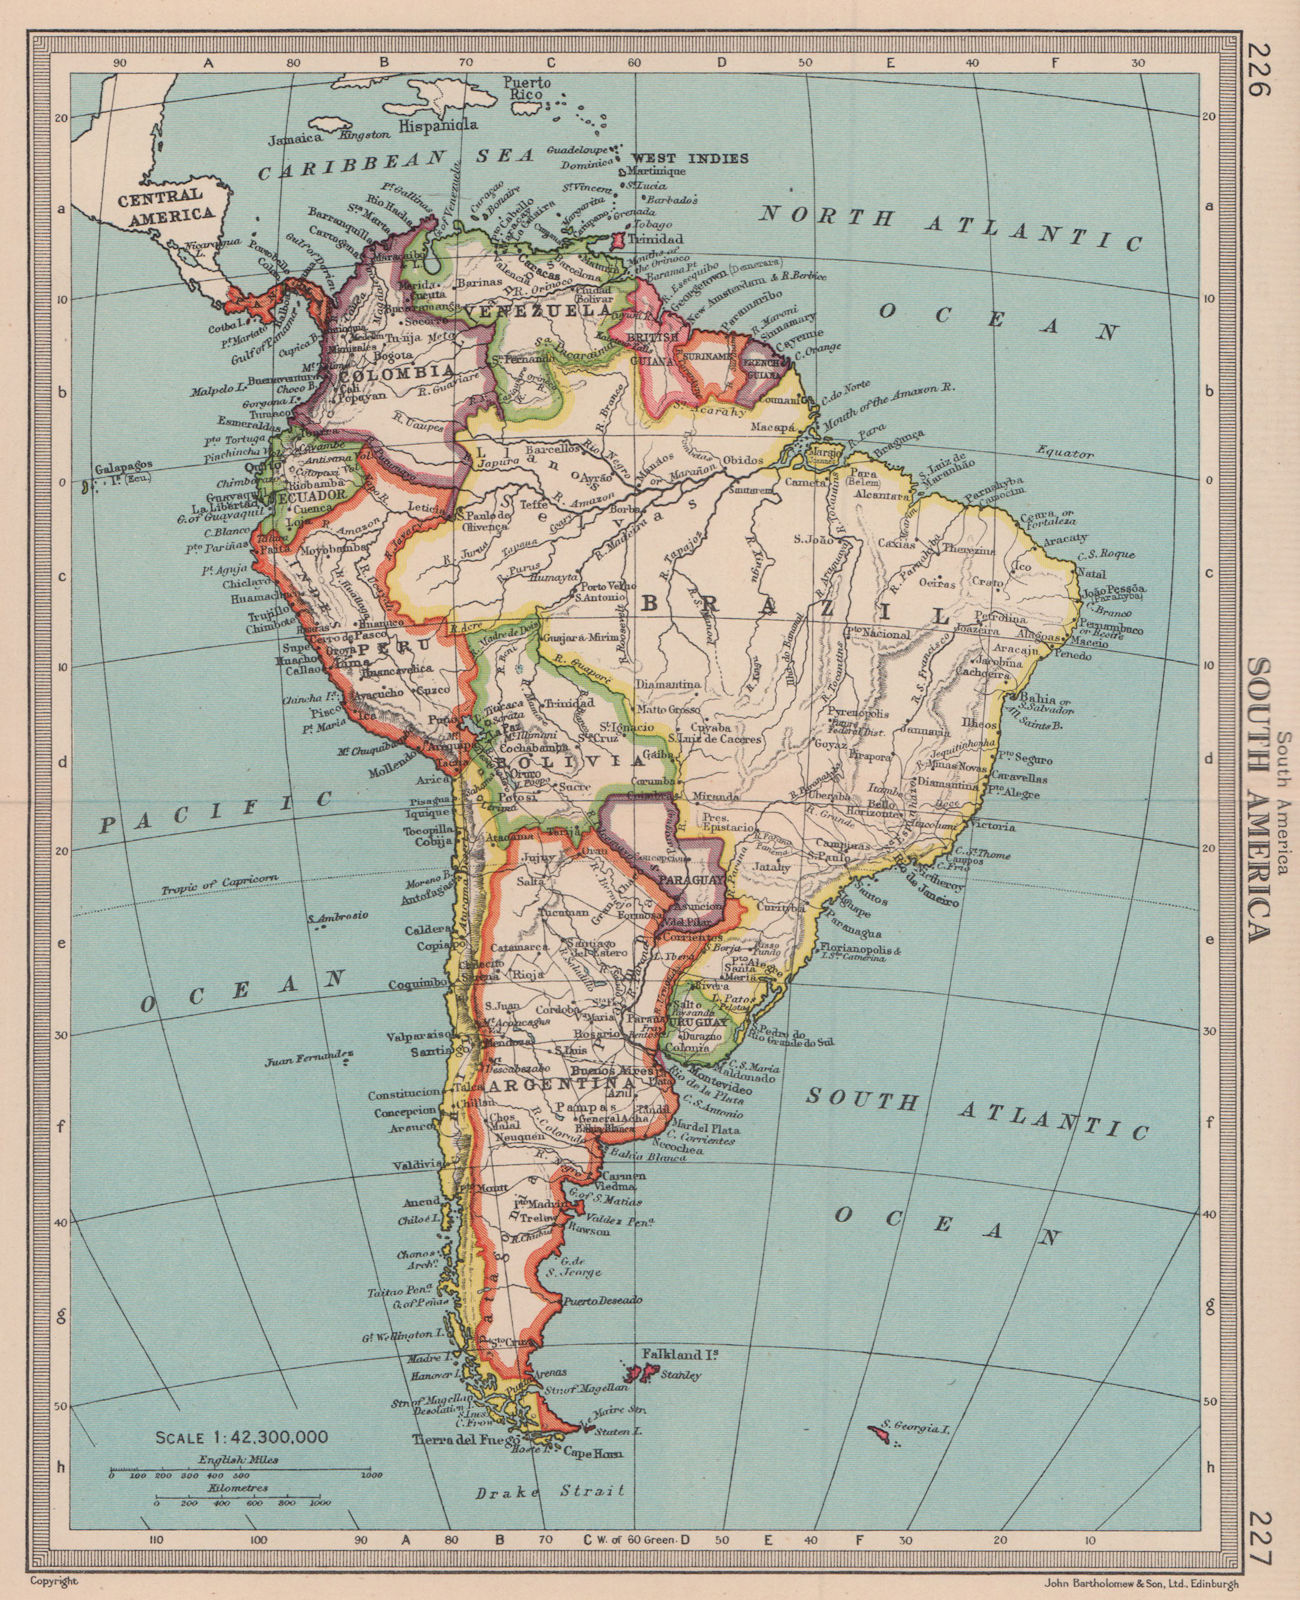 Associate Product South America - Political. BARTHOLOMEW 1949 old vintage map plan chart